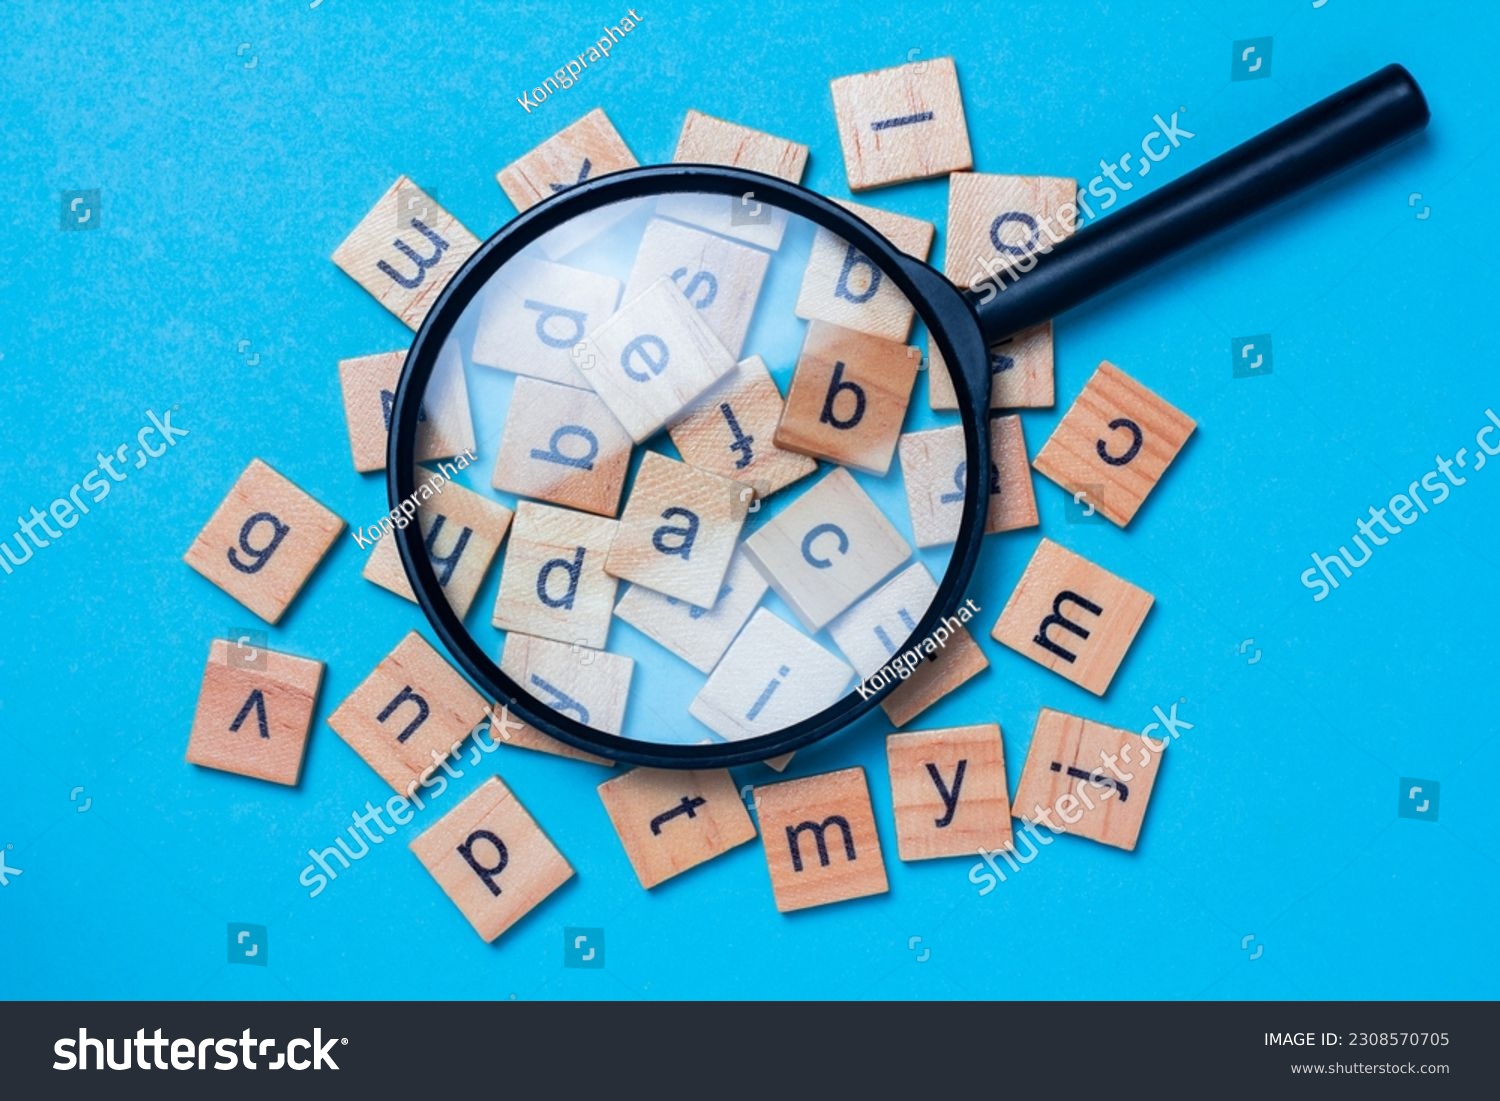 English alphabet made of square wooden tiles with the English alphabet scattered on blue background. The concept of thinking development, grammar. #2308570705